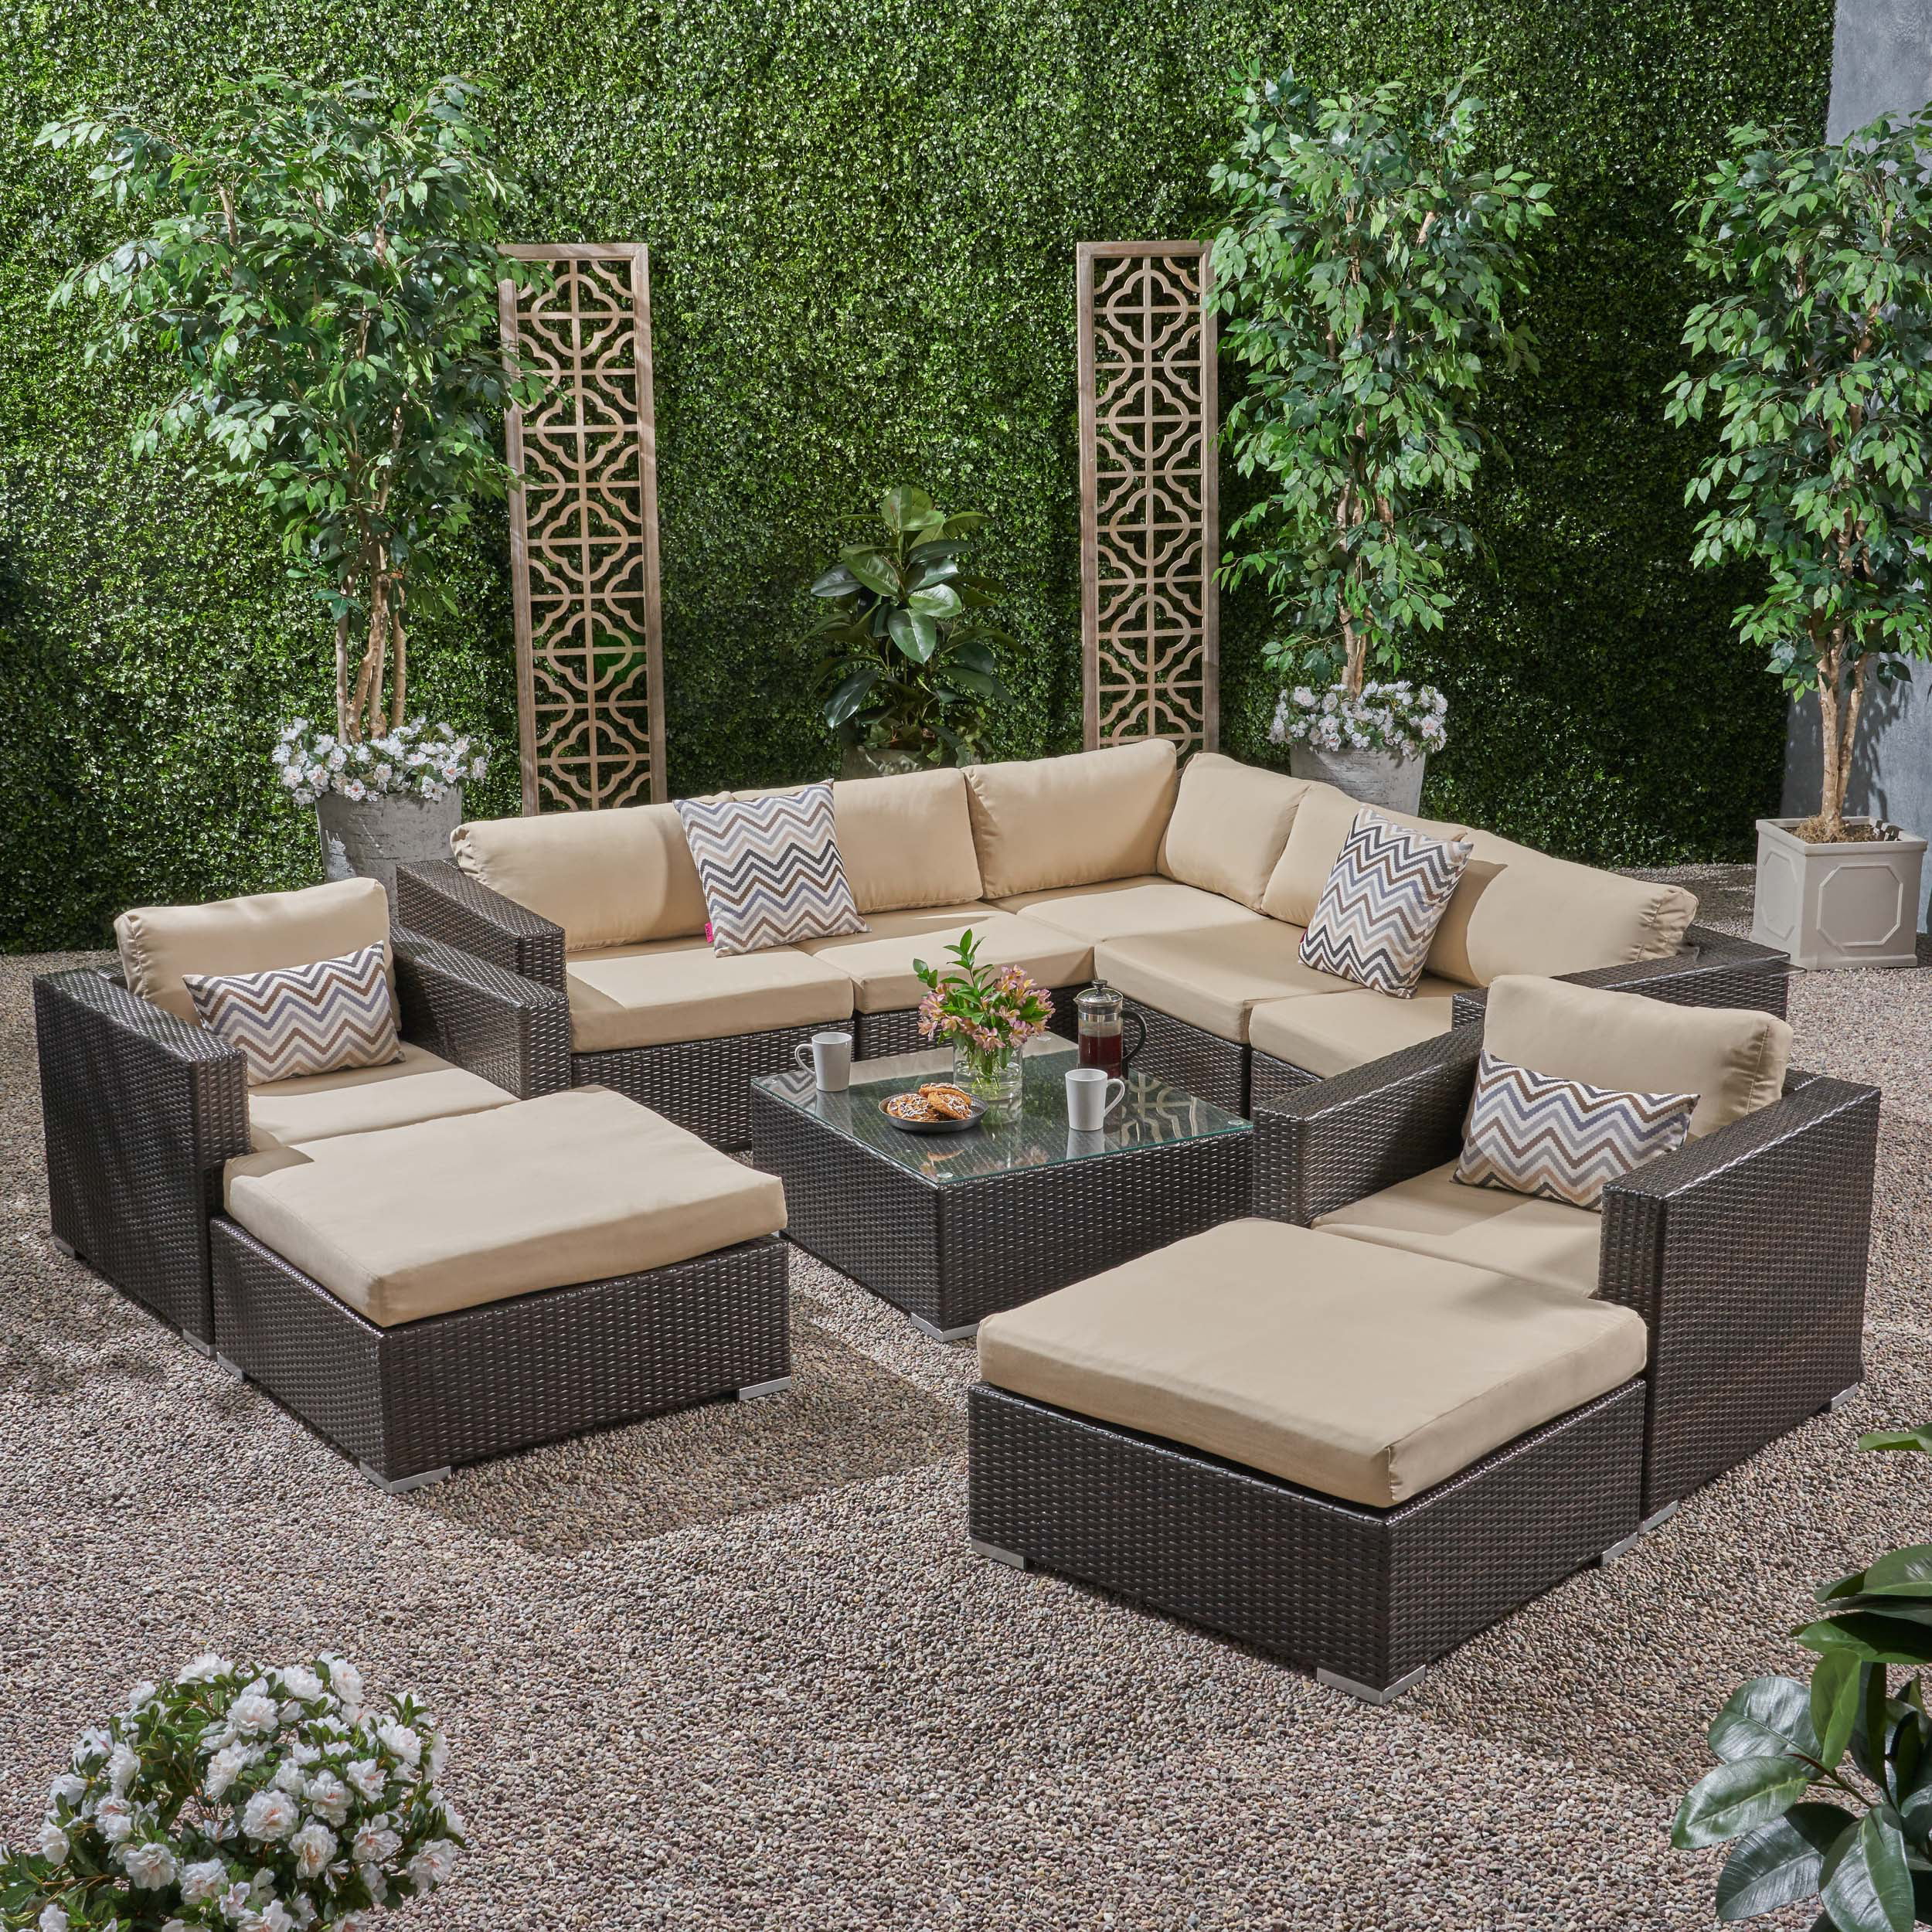 Kyra Rosa Outdoor 7 Seater Wicker Sectional Sofa Set with